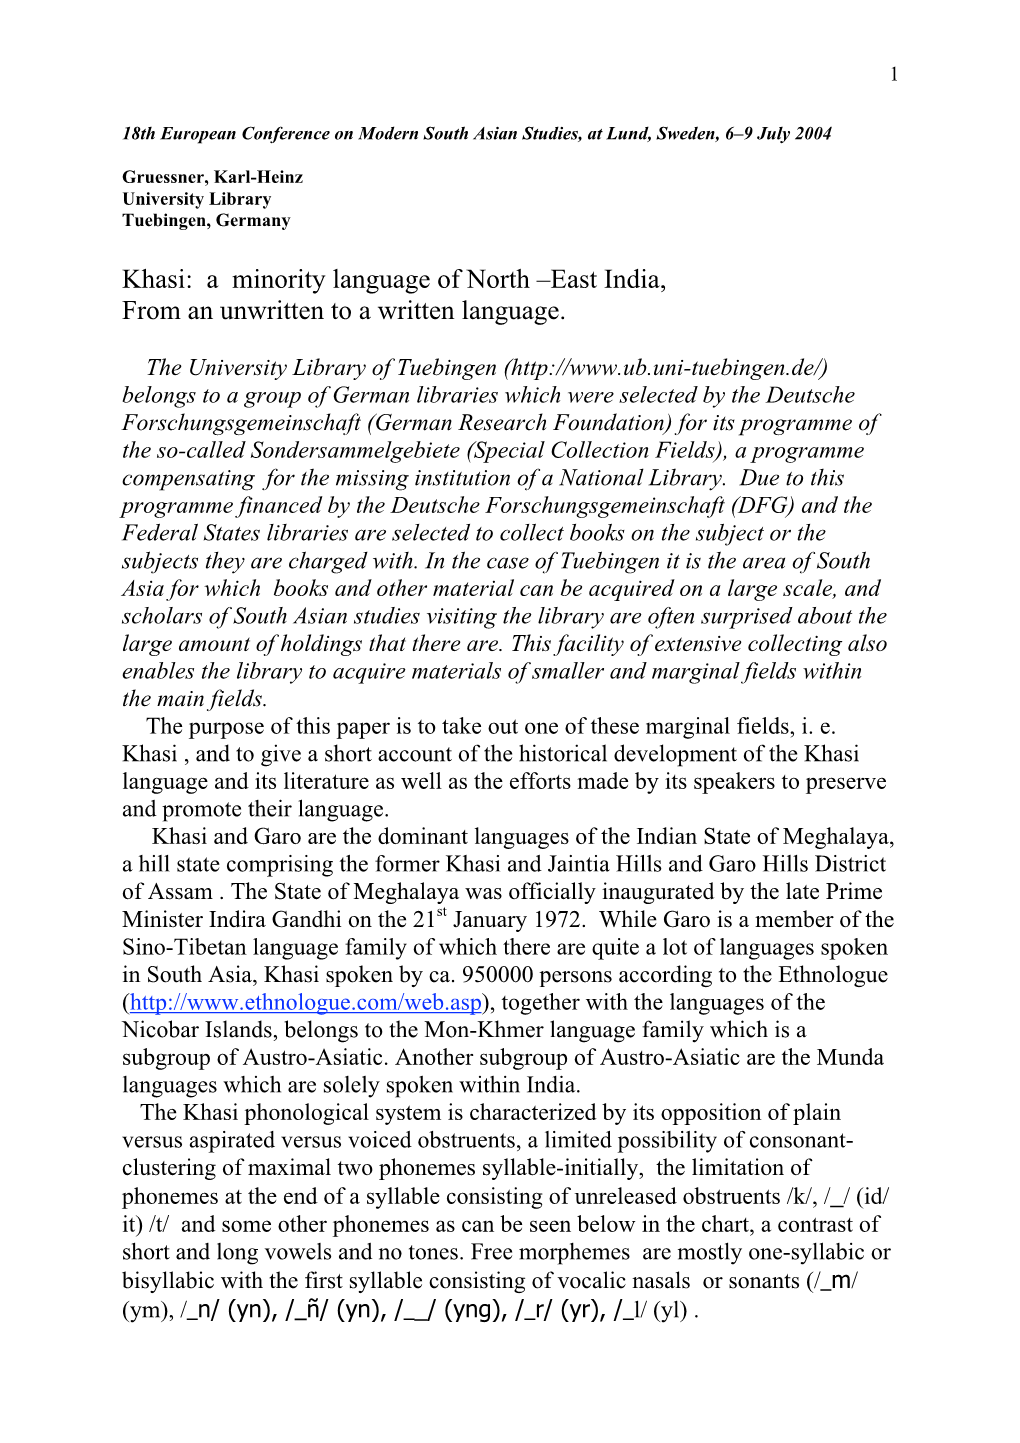 Khasi: a Minority Language of North –East India, from an Unwritten to a Written Language